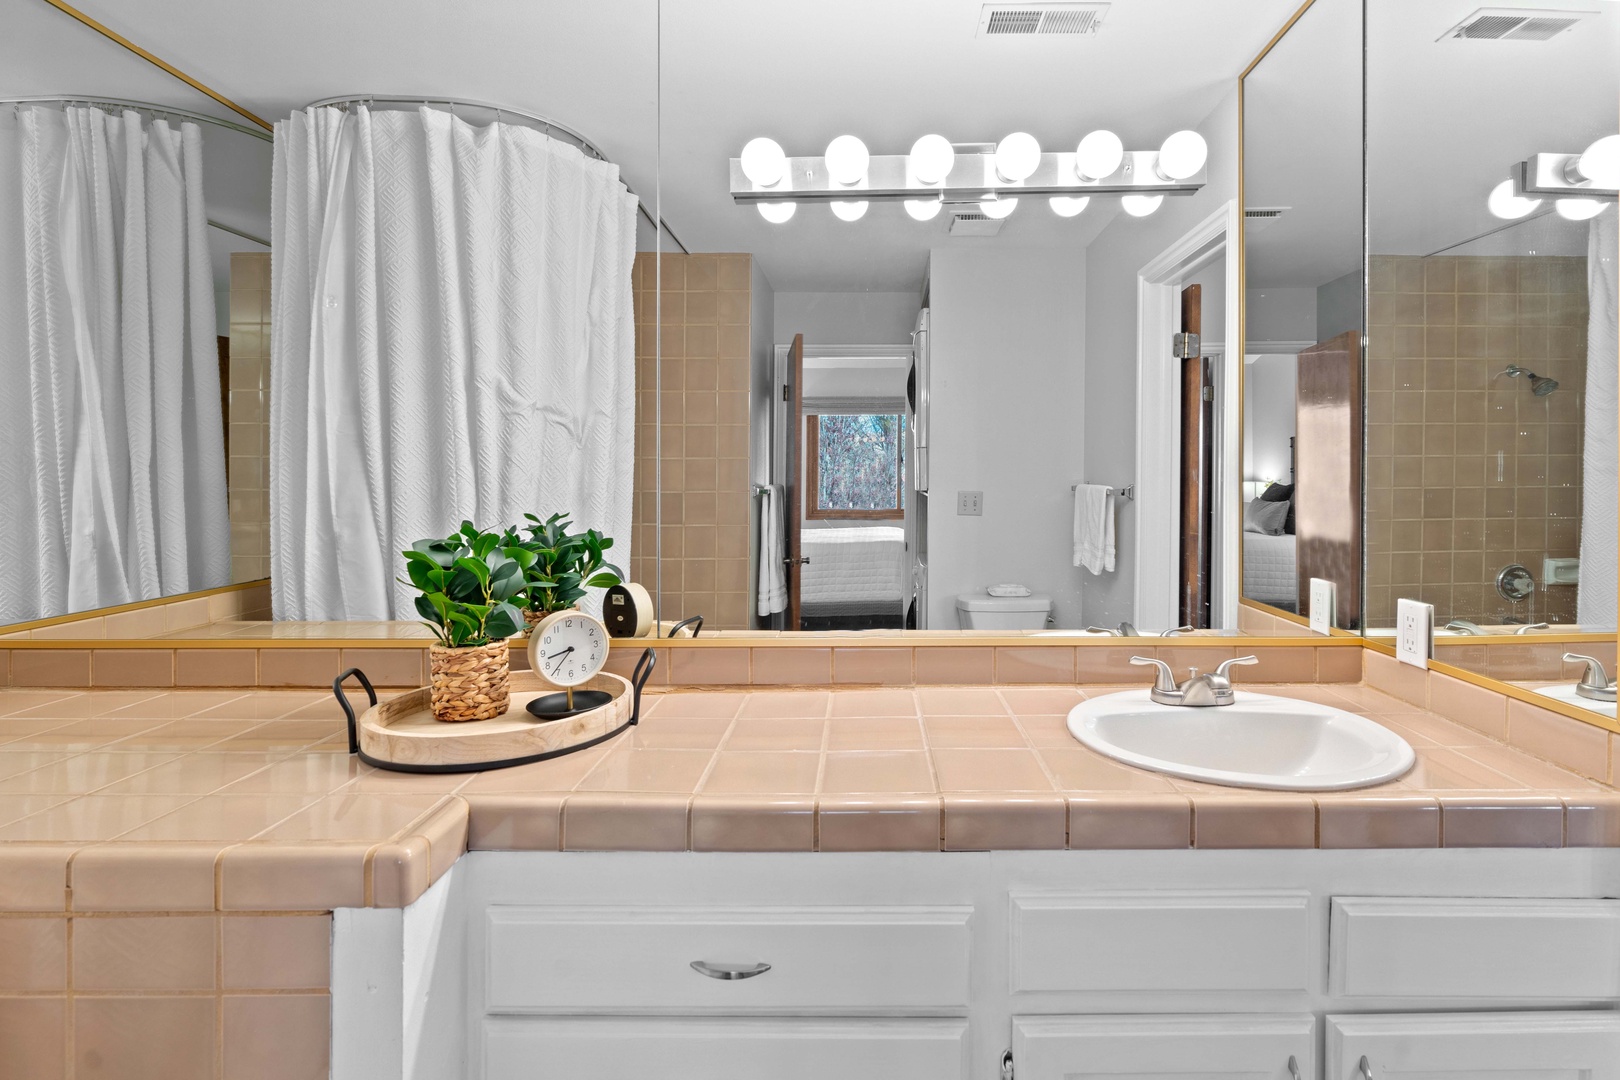 The full bath features a large vanity & shower/tub combo